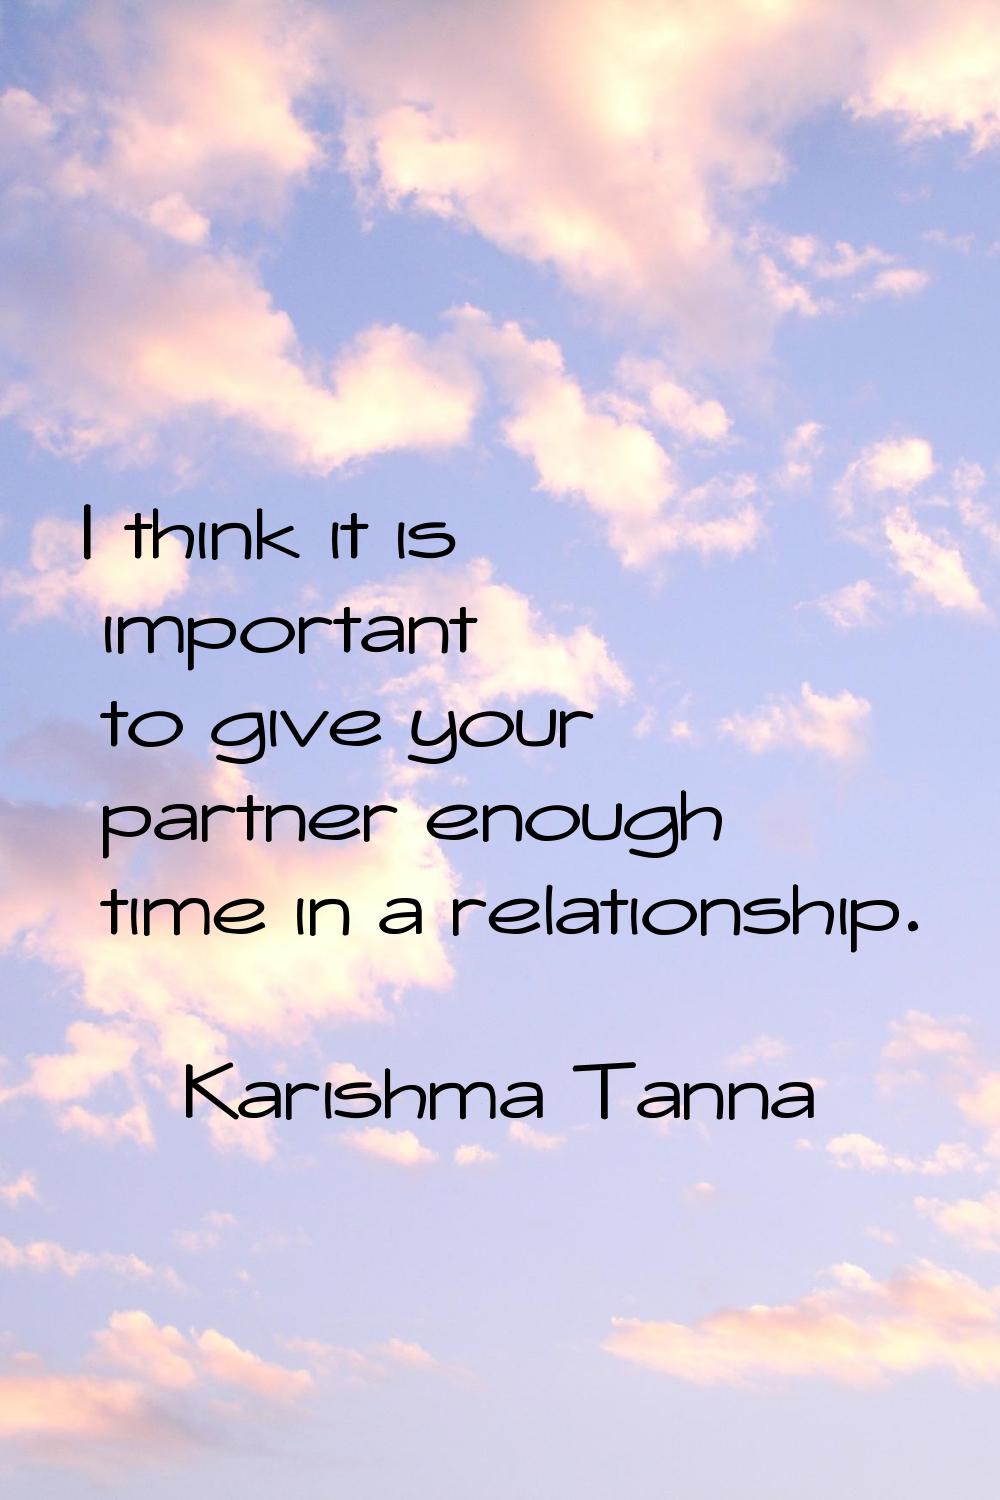 I think it is important to give your partner enough time in a relationship.